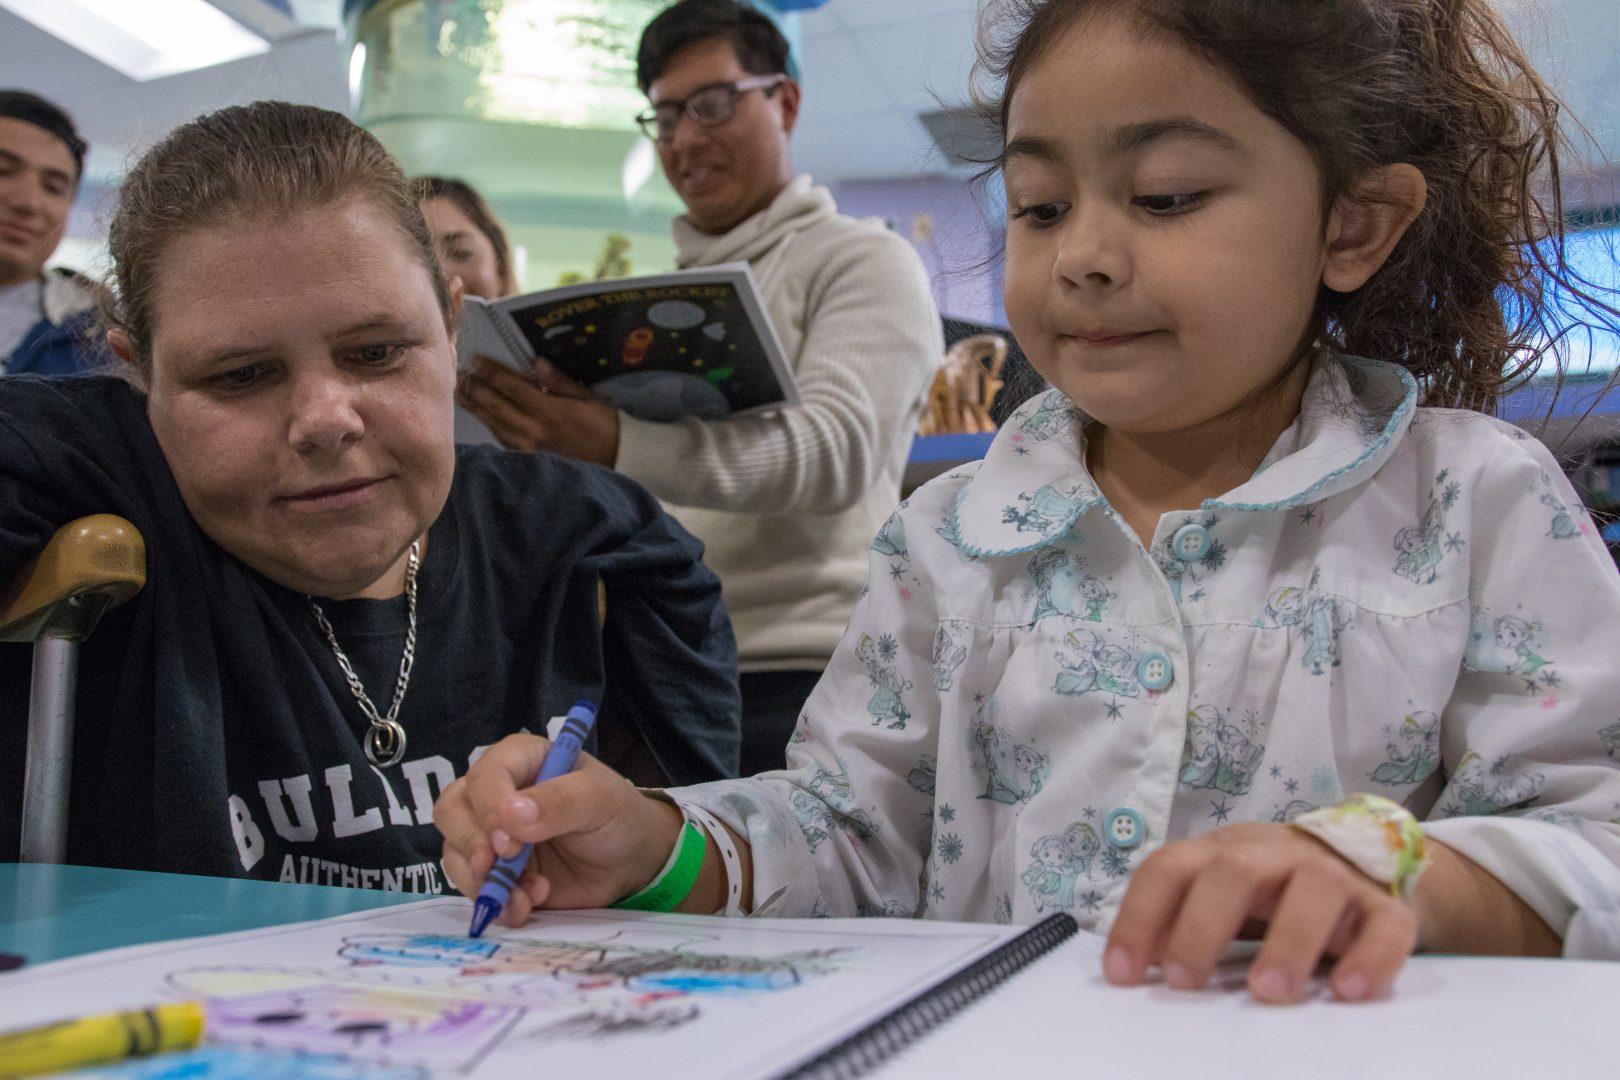 Valley Children’s patient Maddlyn begins using her new crayons and a coloring book that she received from Dr. Tamrya Pierce’s MCJ 106 students at Valley Children’s hospital, on Nov. 17, 2017. (Alejandro Soto/ The Collegian)